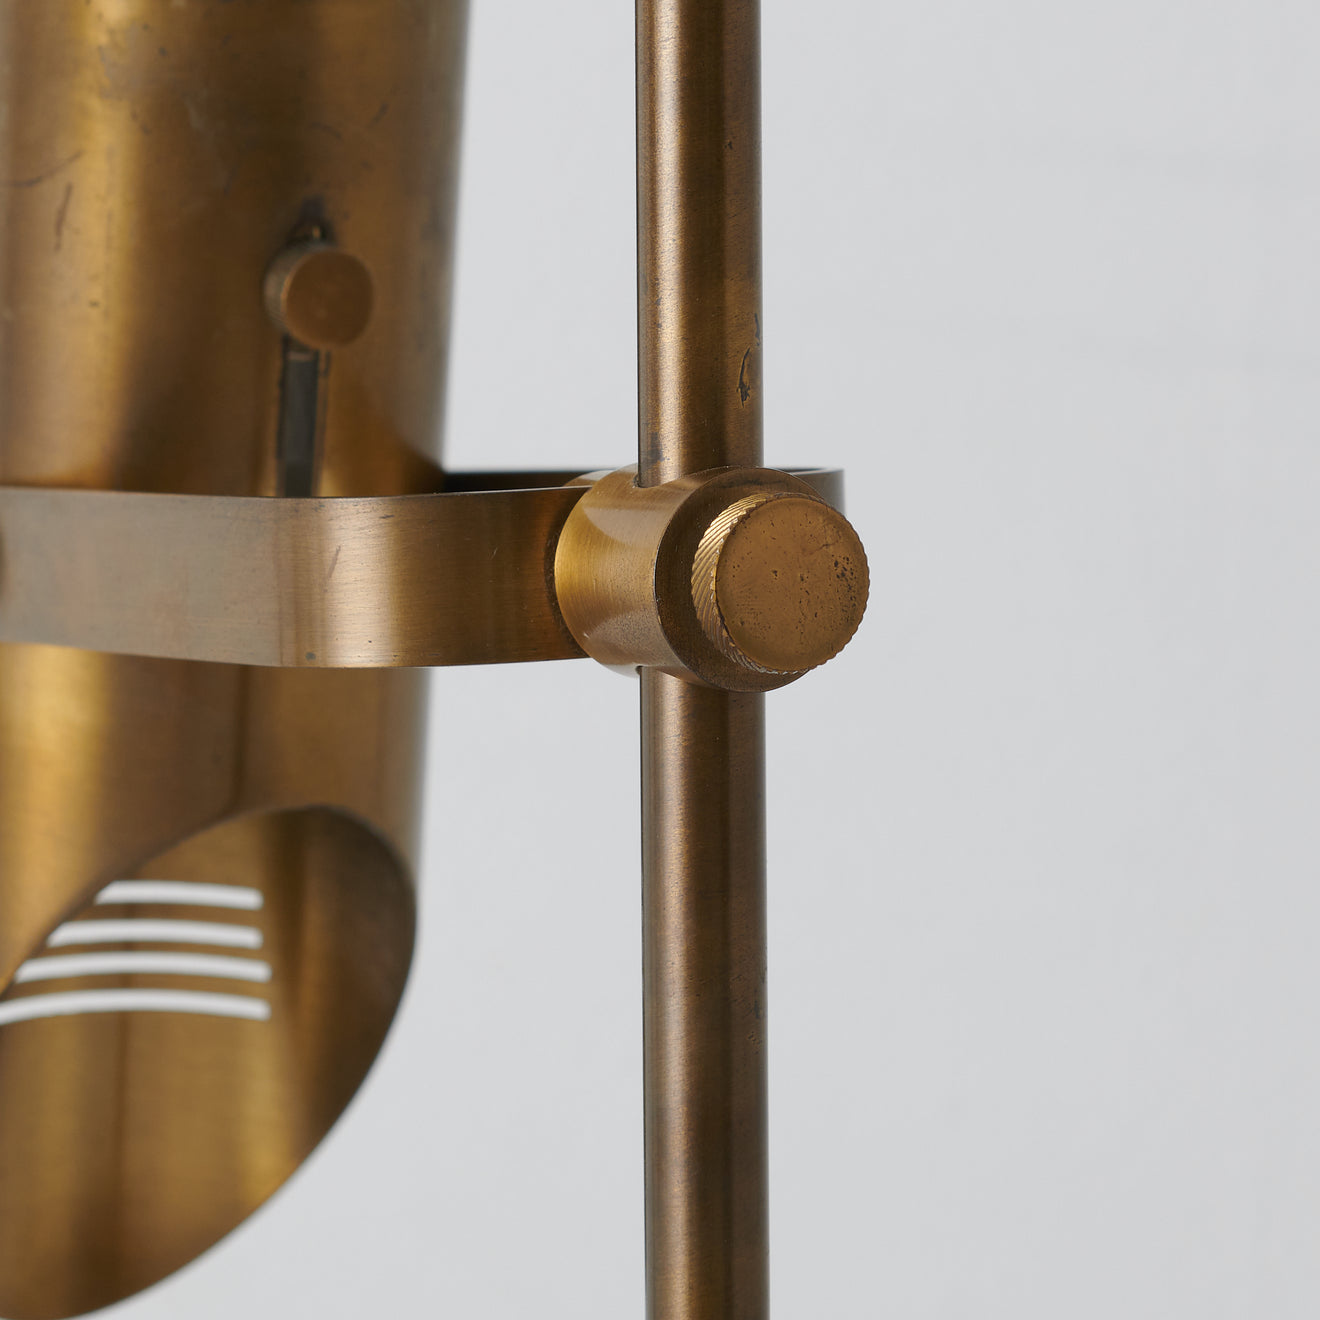 PAIR OF ITALIAN BRASS ADJUSTABLE TABLE LAMPS